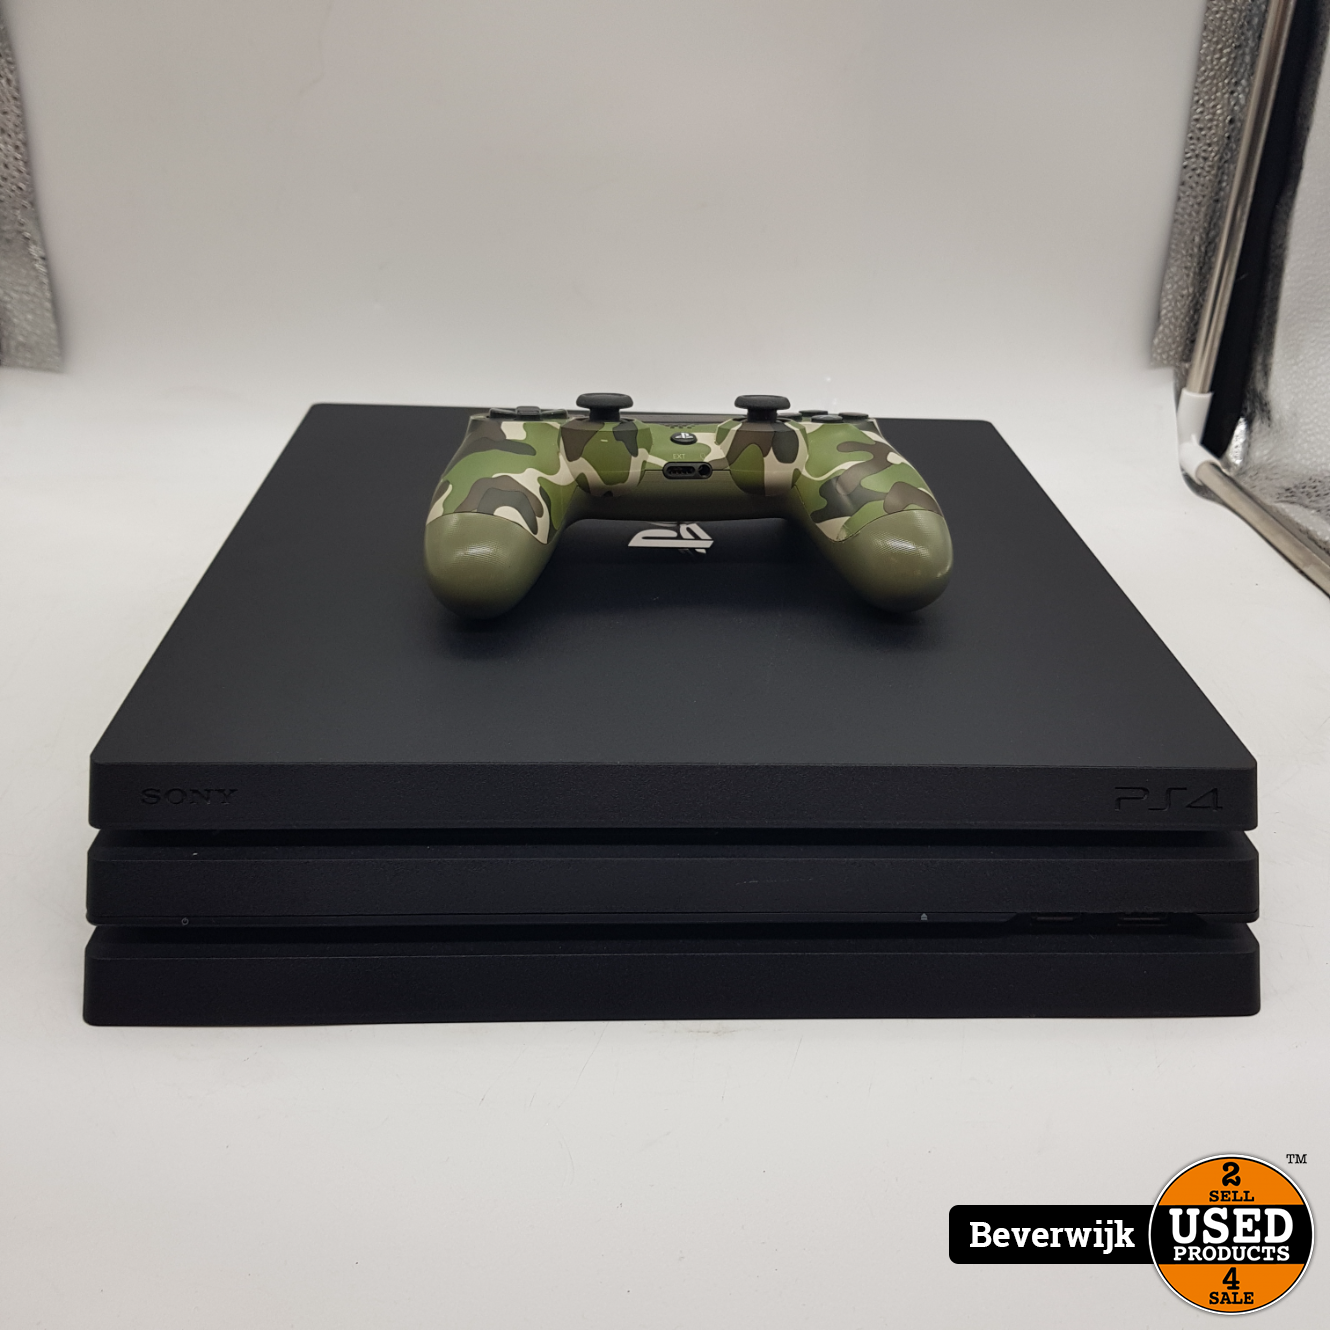 Sony Playstation 4 Pro 1TB - In Goede Staat - Used Products Beverwijk